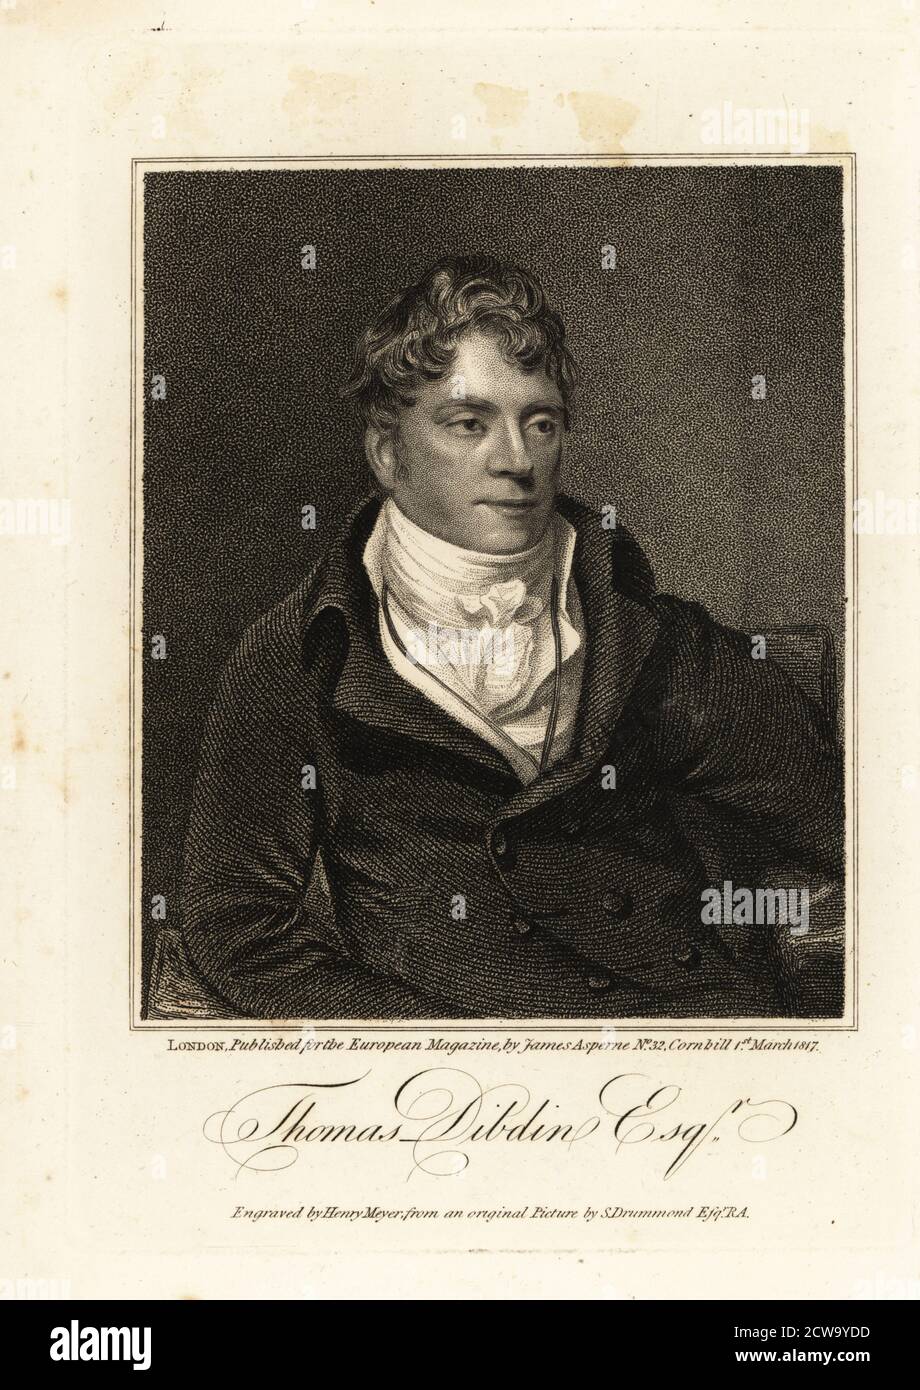 Thomas John Dibdin (1771-1841), English dramatist and songwriter of The Oak Table and The Snug Little Island. Depicted in high-collar coat and cravat. Thomas Dibdin Esquire. Copperplate engraving by Henry Meyer after an original painting by Samuel Drummond published in the European Magazine, James Asperne, 32 Cornhill, London, 1817. Stock Photo